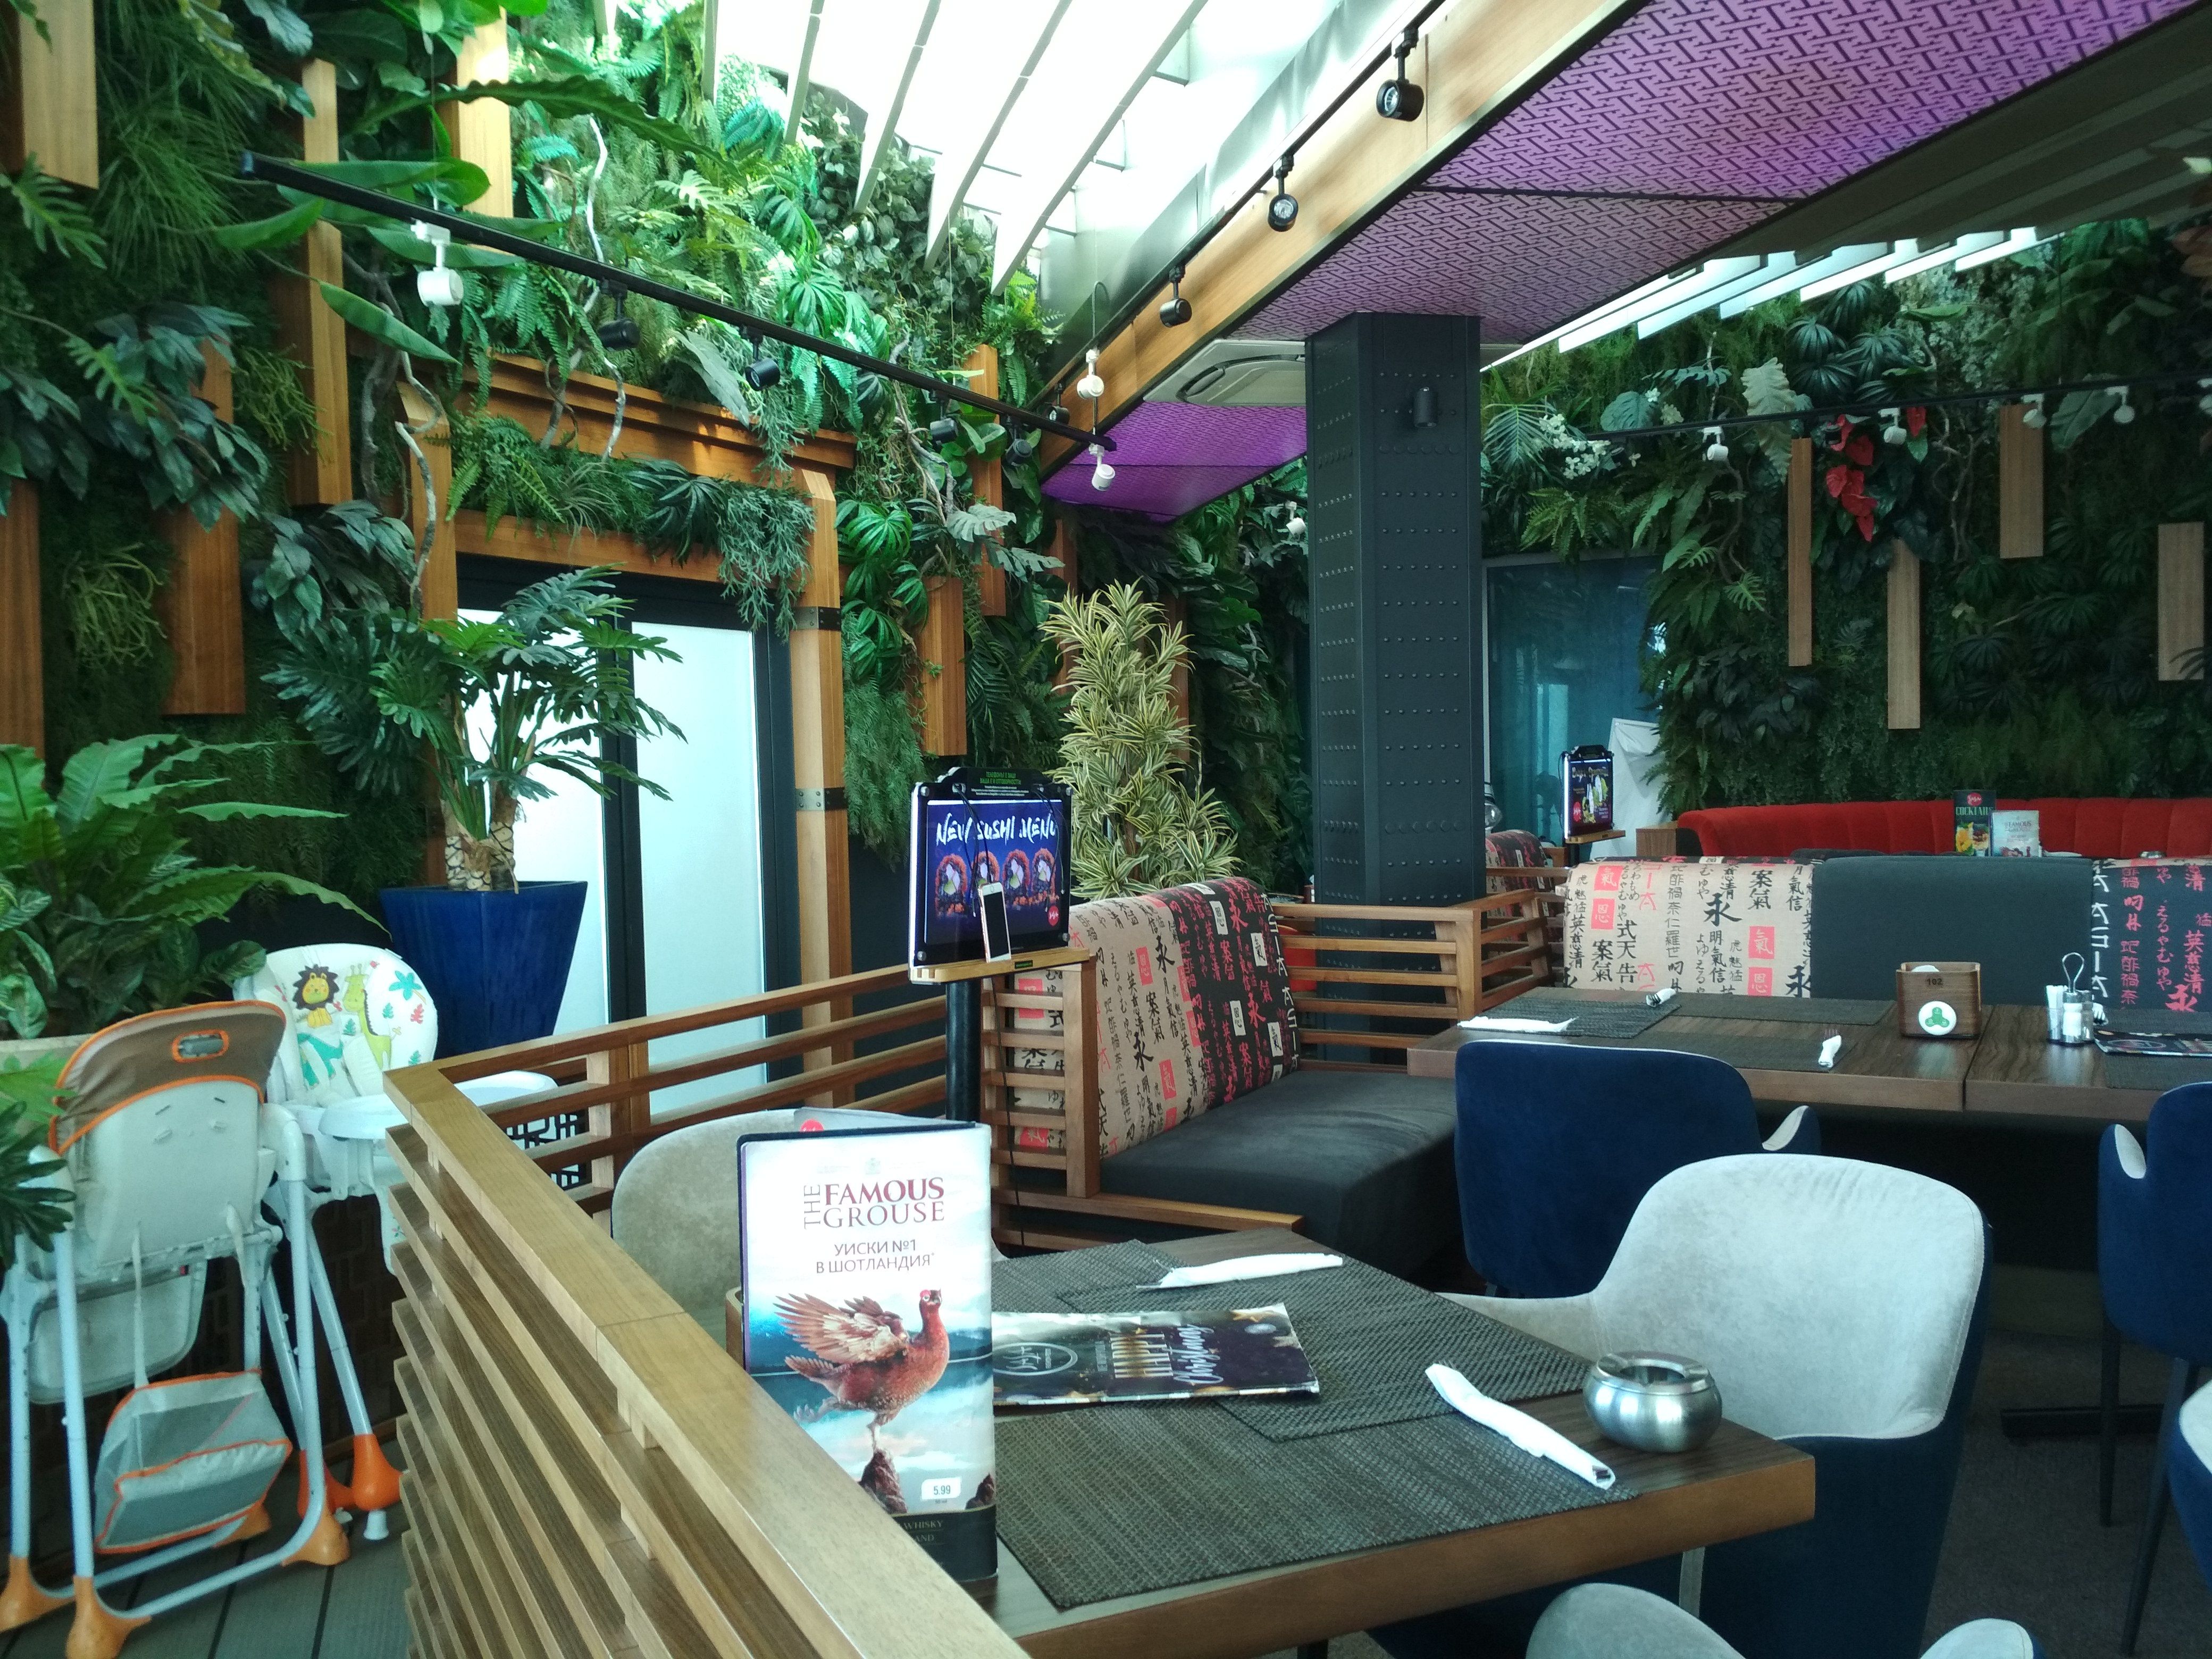 Caption: A photo of enclosed tables and comfortable chairs, with artificial plants covering the walls and high chairs for children in the background taken inside the SASA restaurant in Sofia, Bulgaria. (Local Guide @DeniGu)